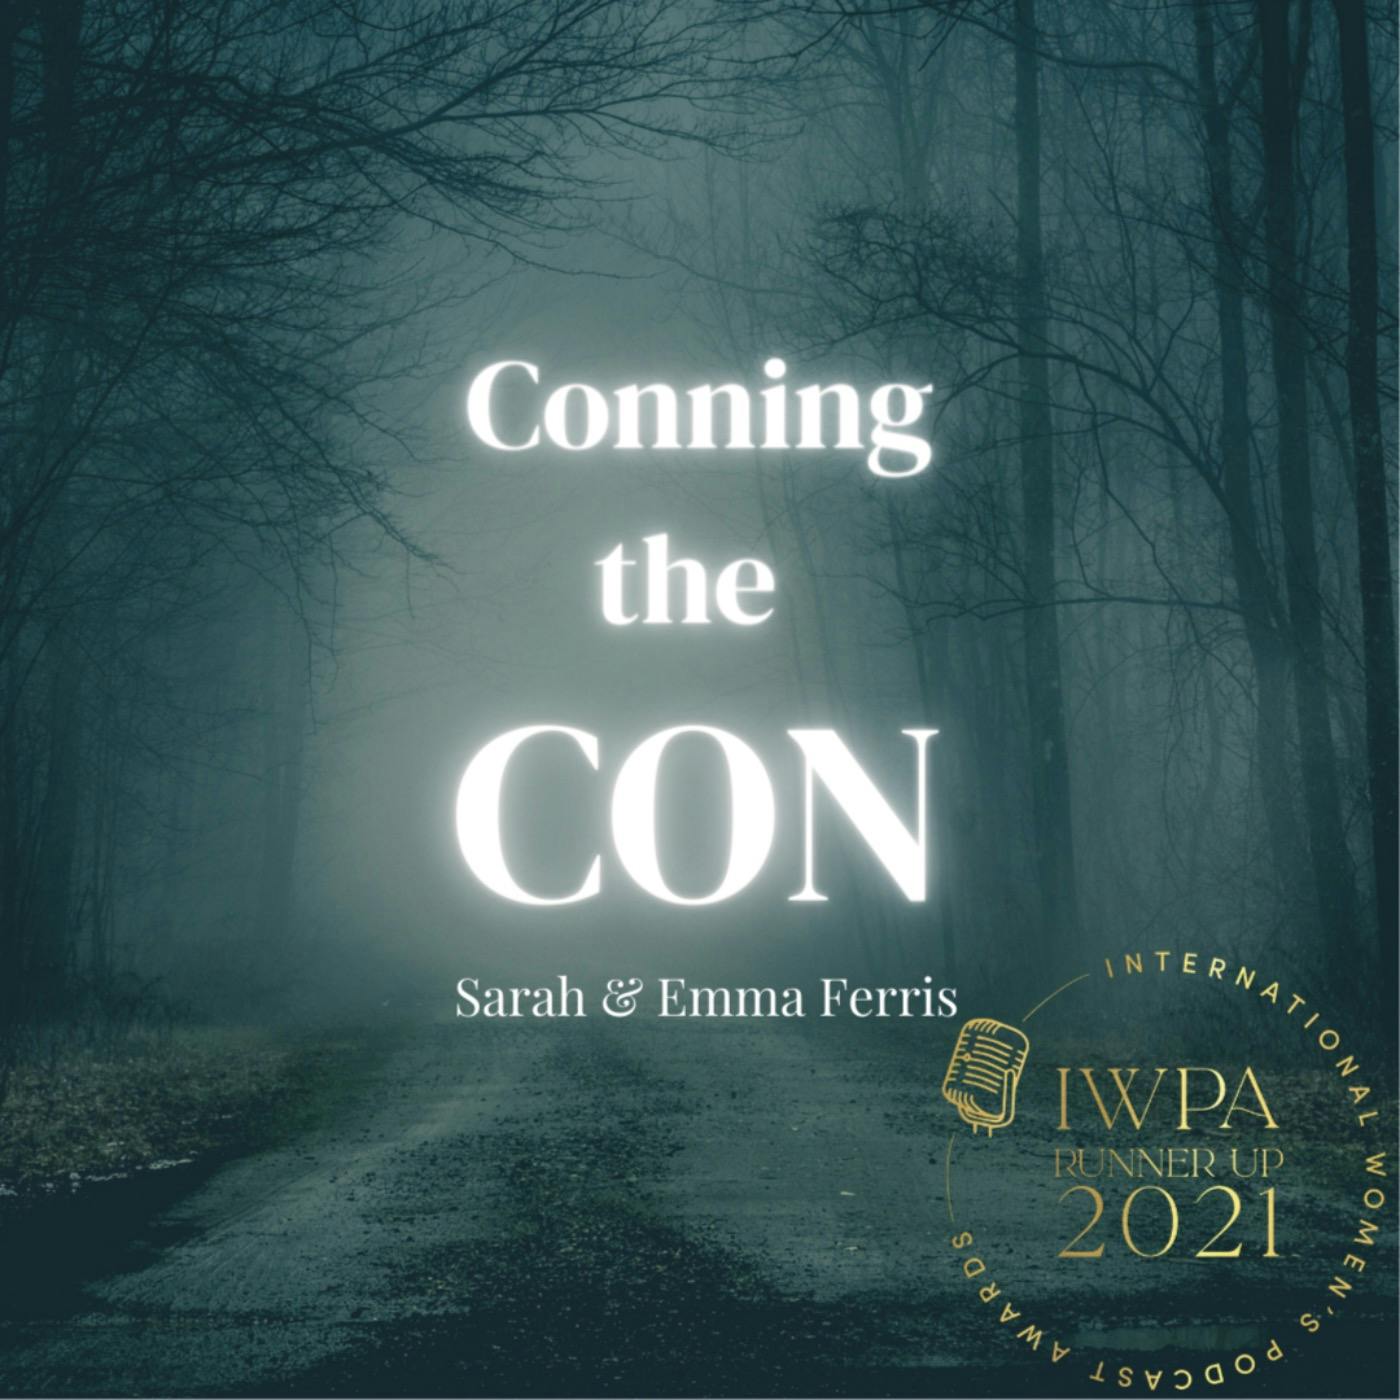 Introducing Conning the Con